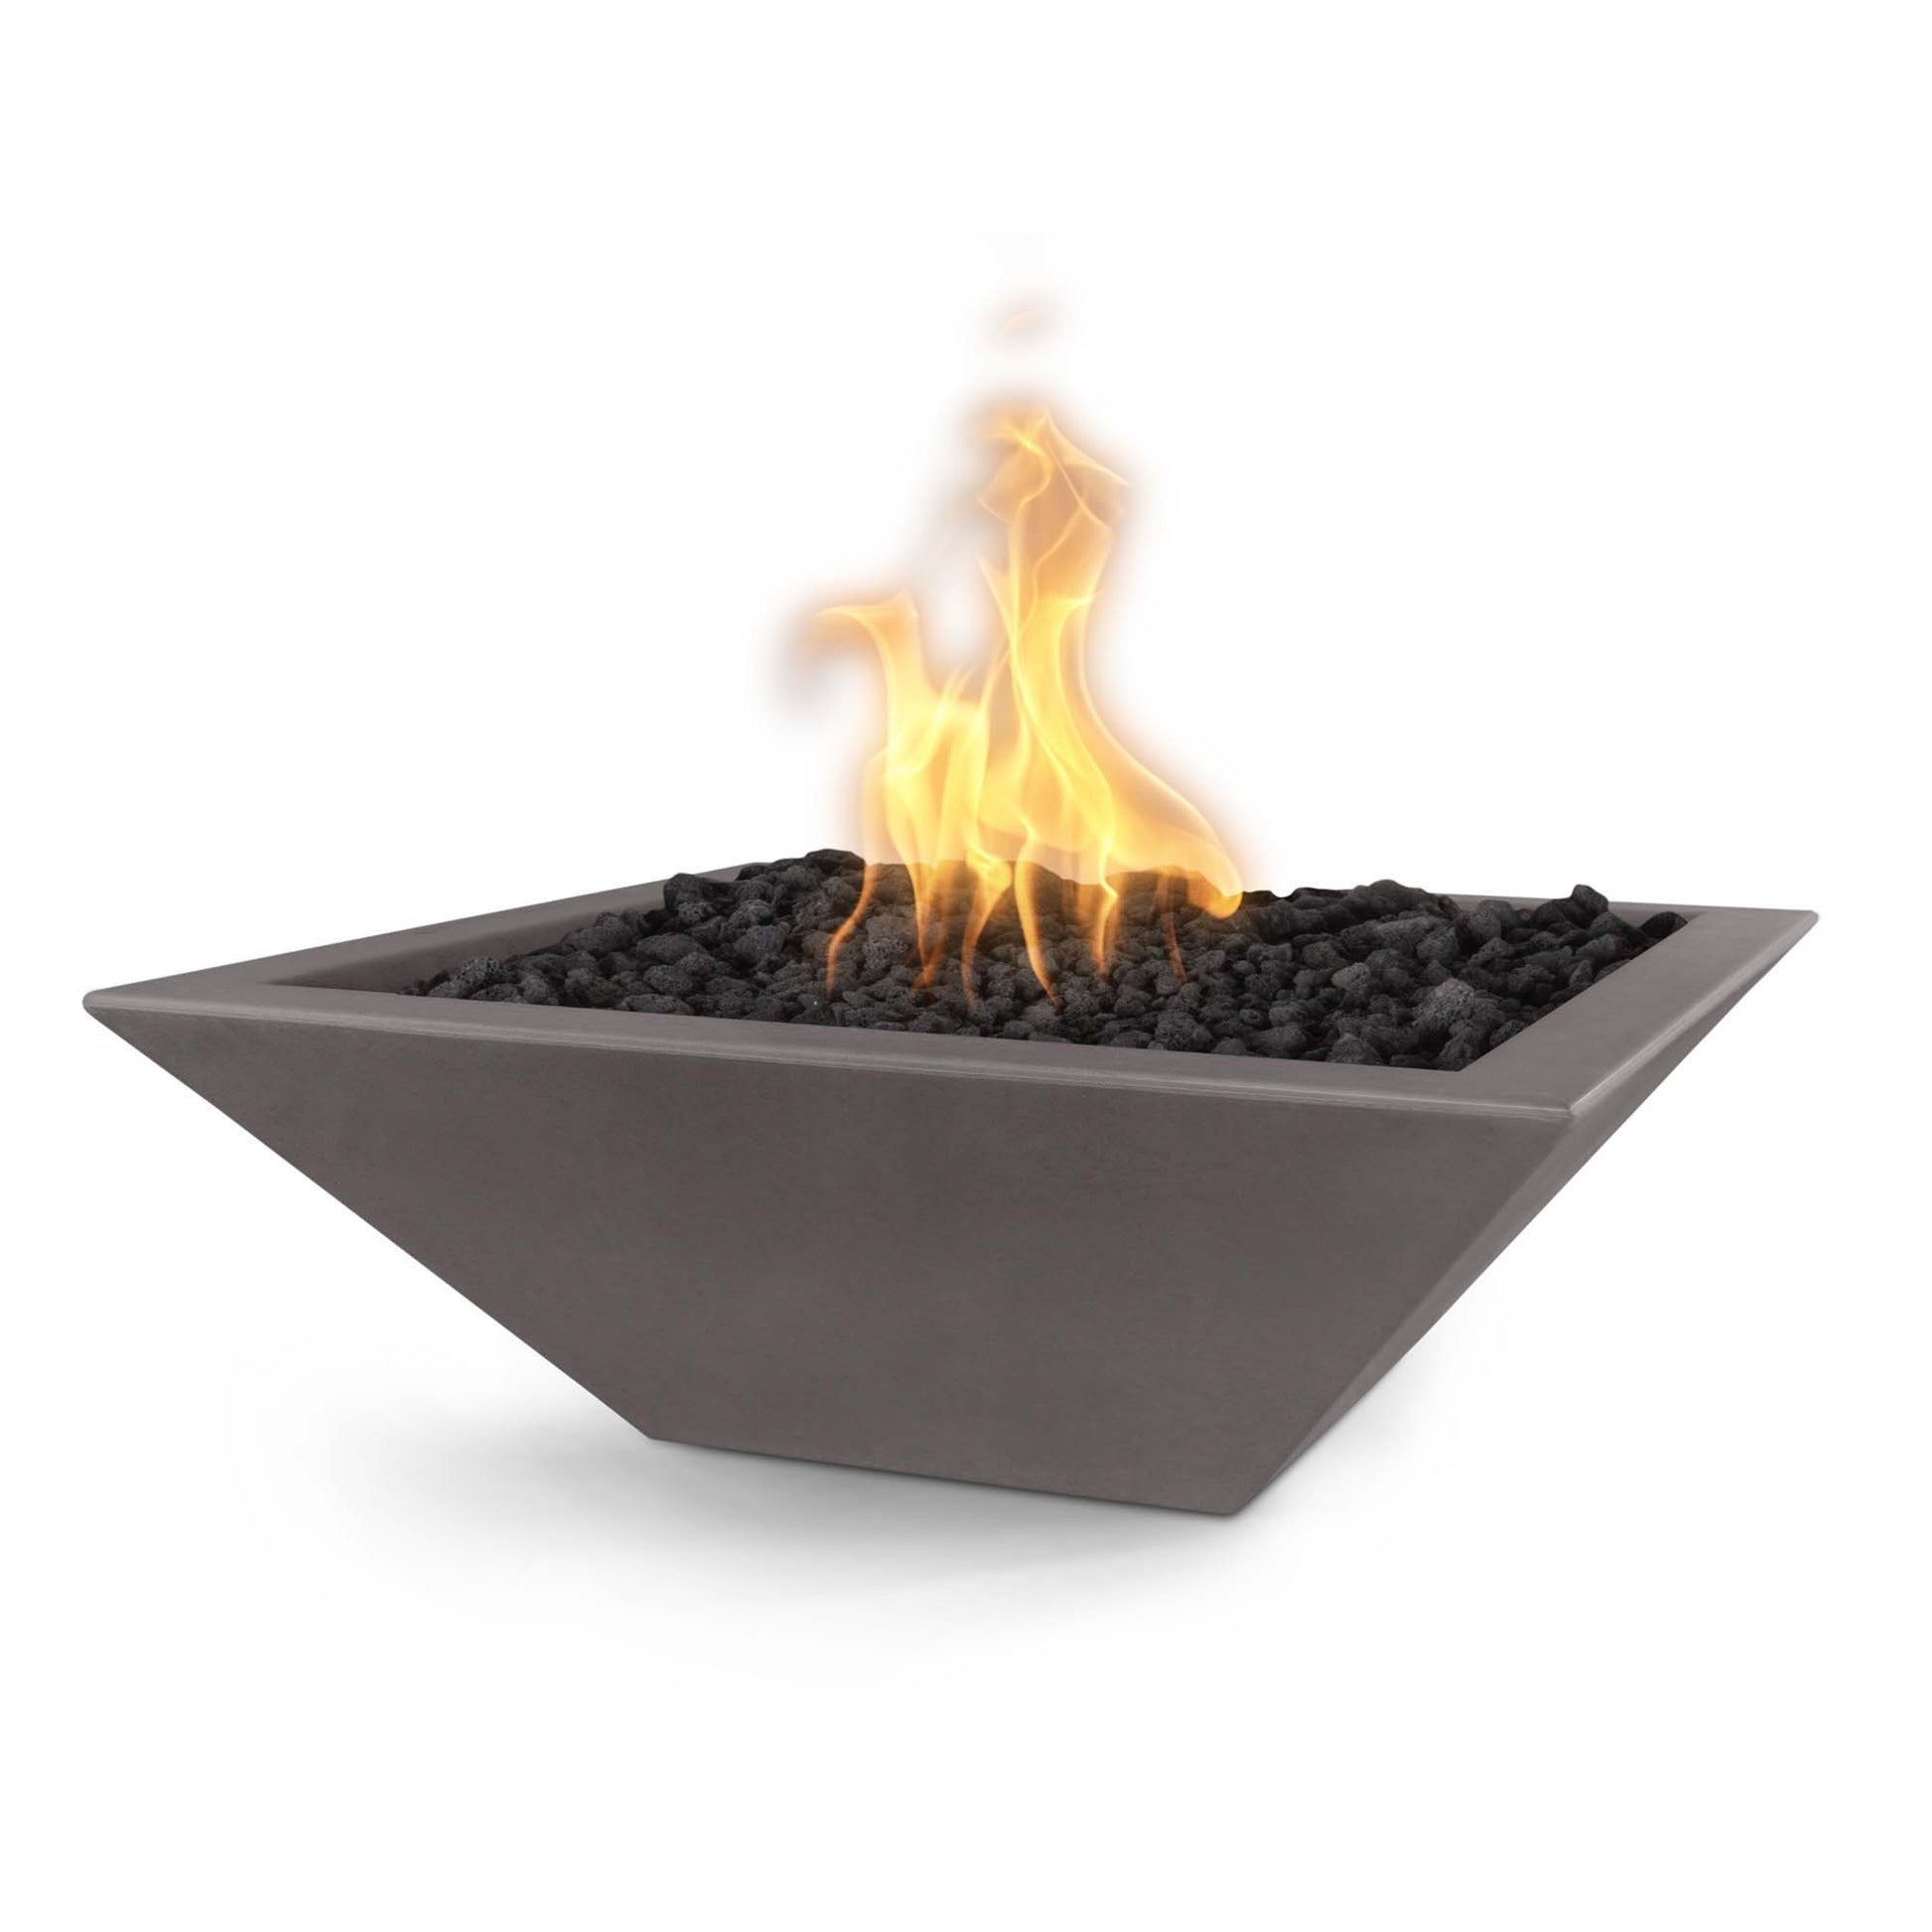 The Outdoor Plus Square Maya 30" Natural Gray GFRC Concrete Liquid Propane Fire Bowl with Match Lit with Flame Sense Ignition